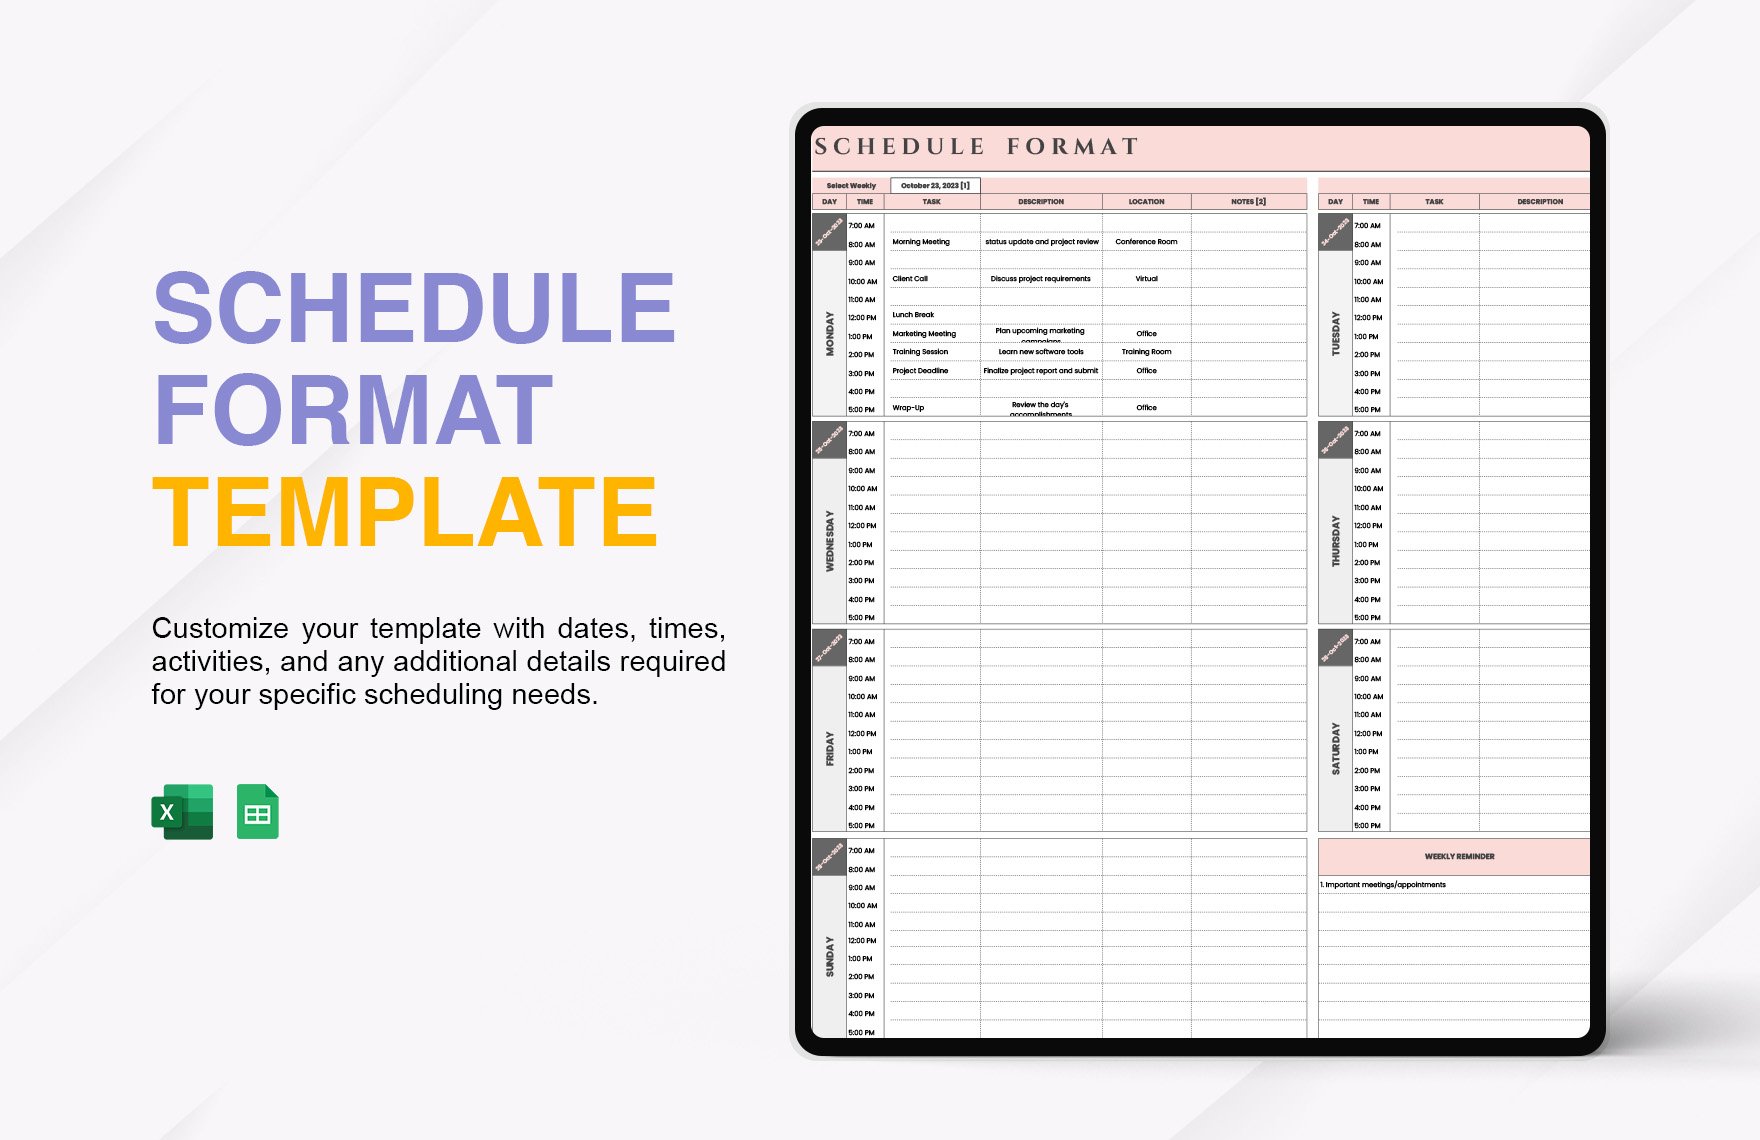 Free Schedule Format Template in Excel, Google Sheets